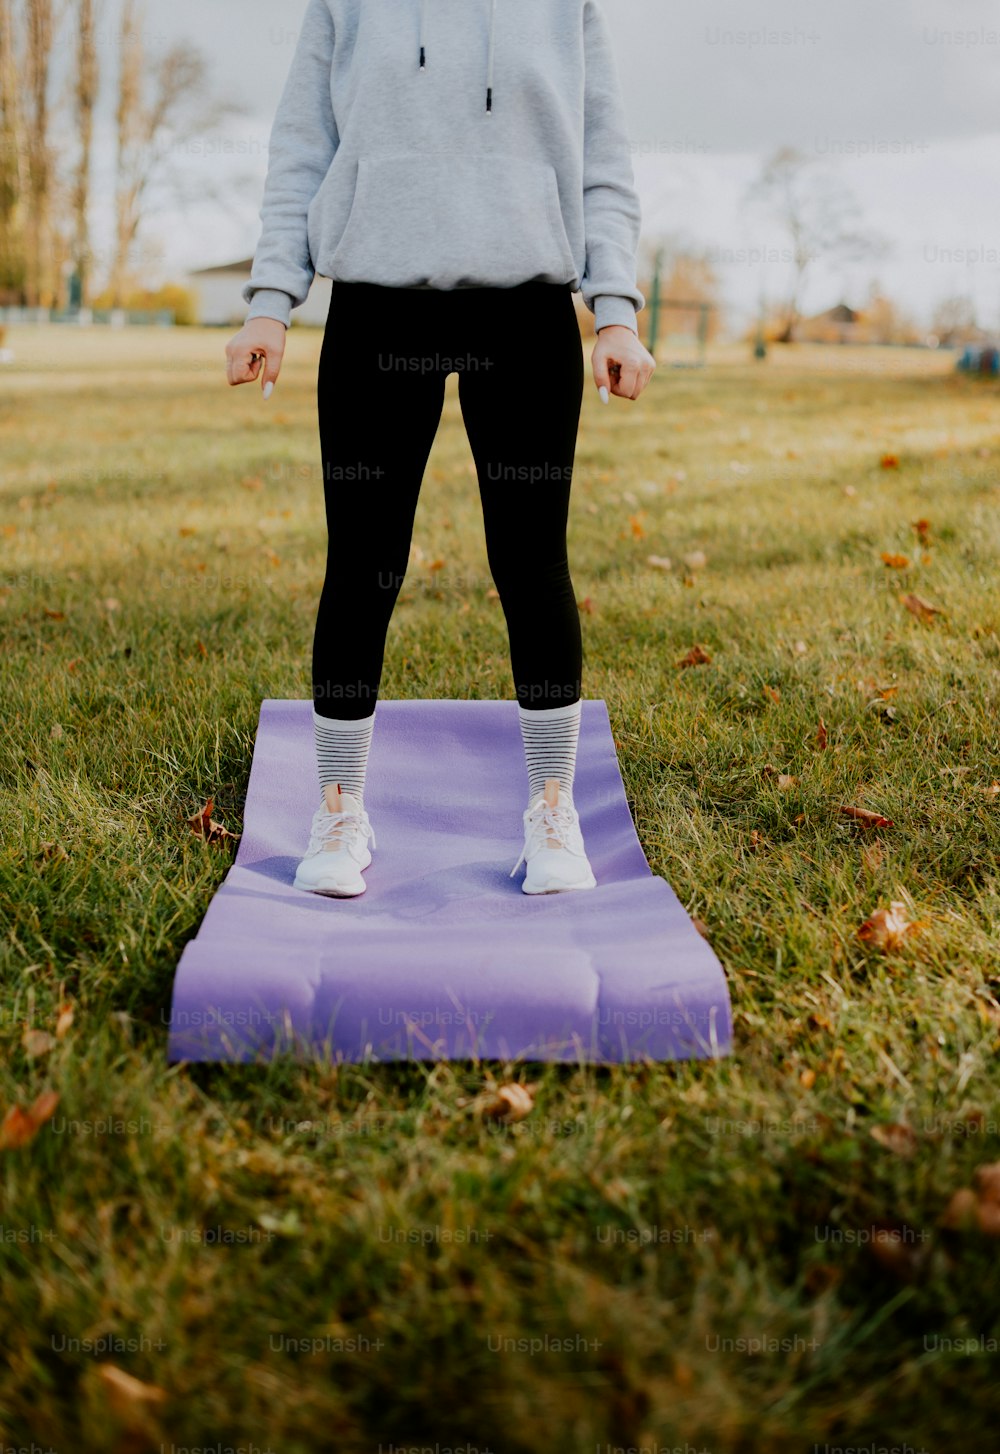 a person standing on a purple mat in a field